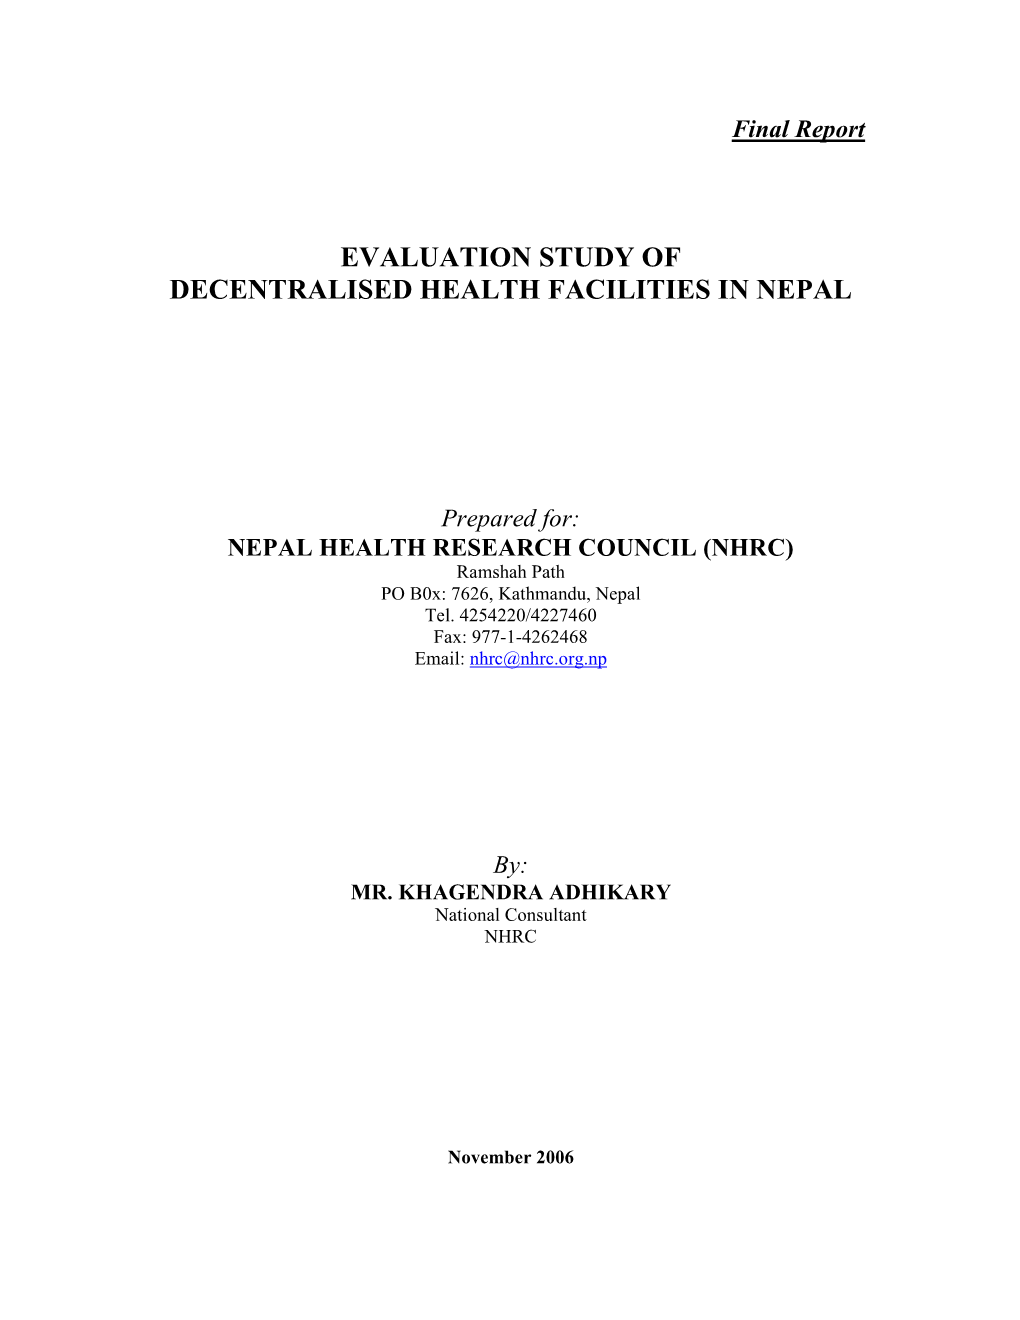 Evaluation Study of Decentralised Health Facilities in Nepal